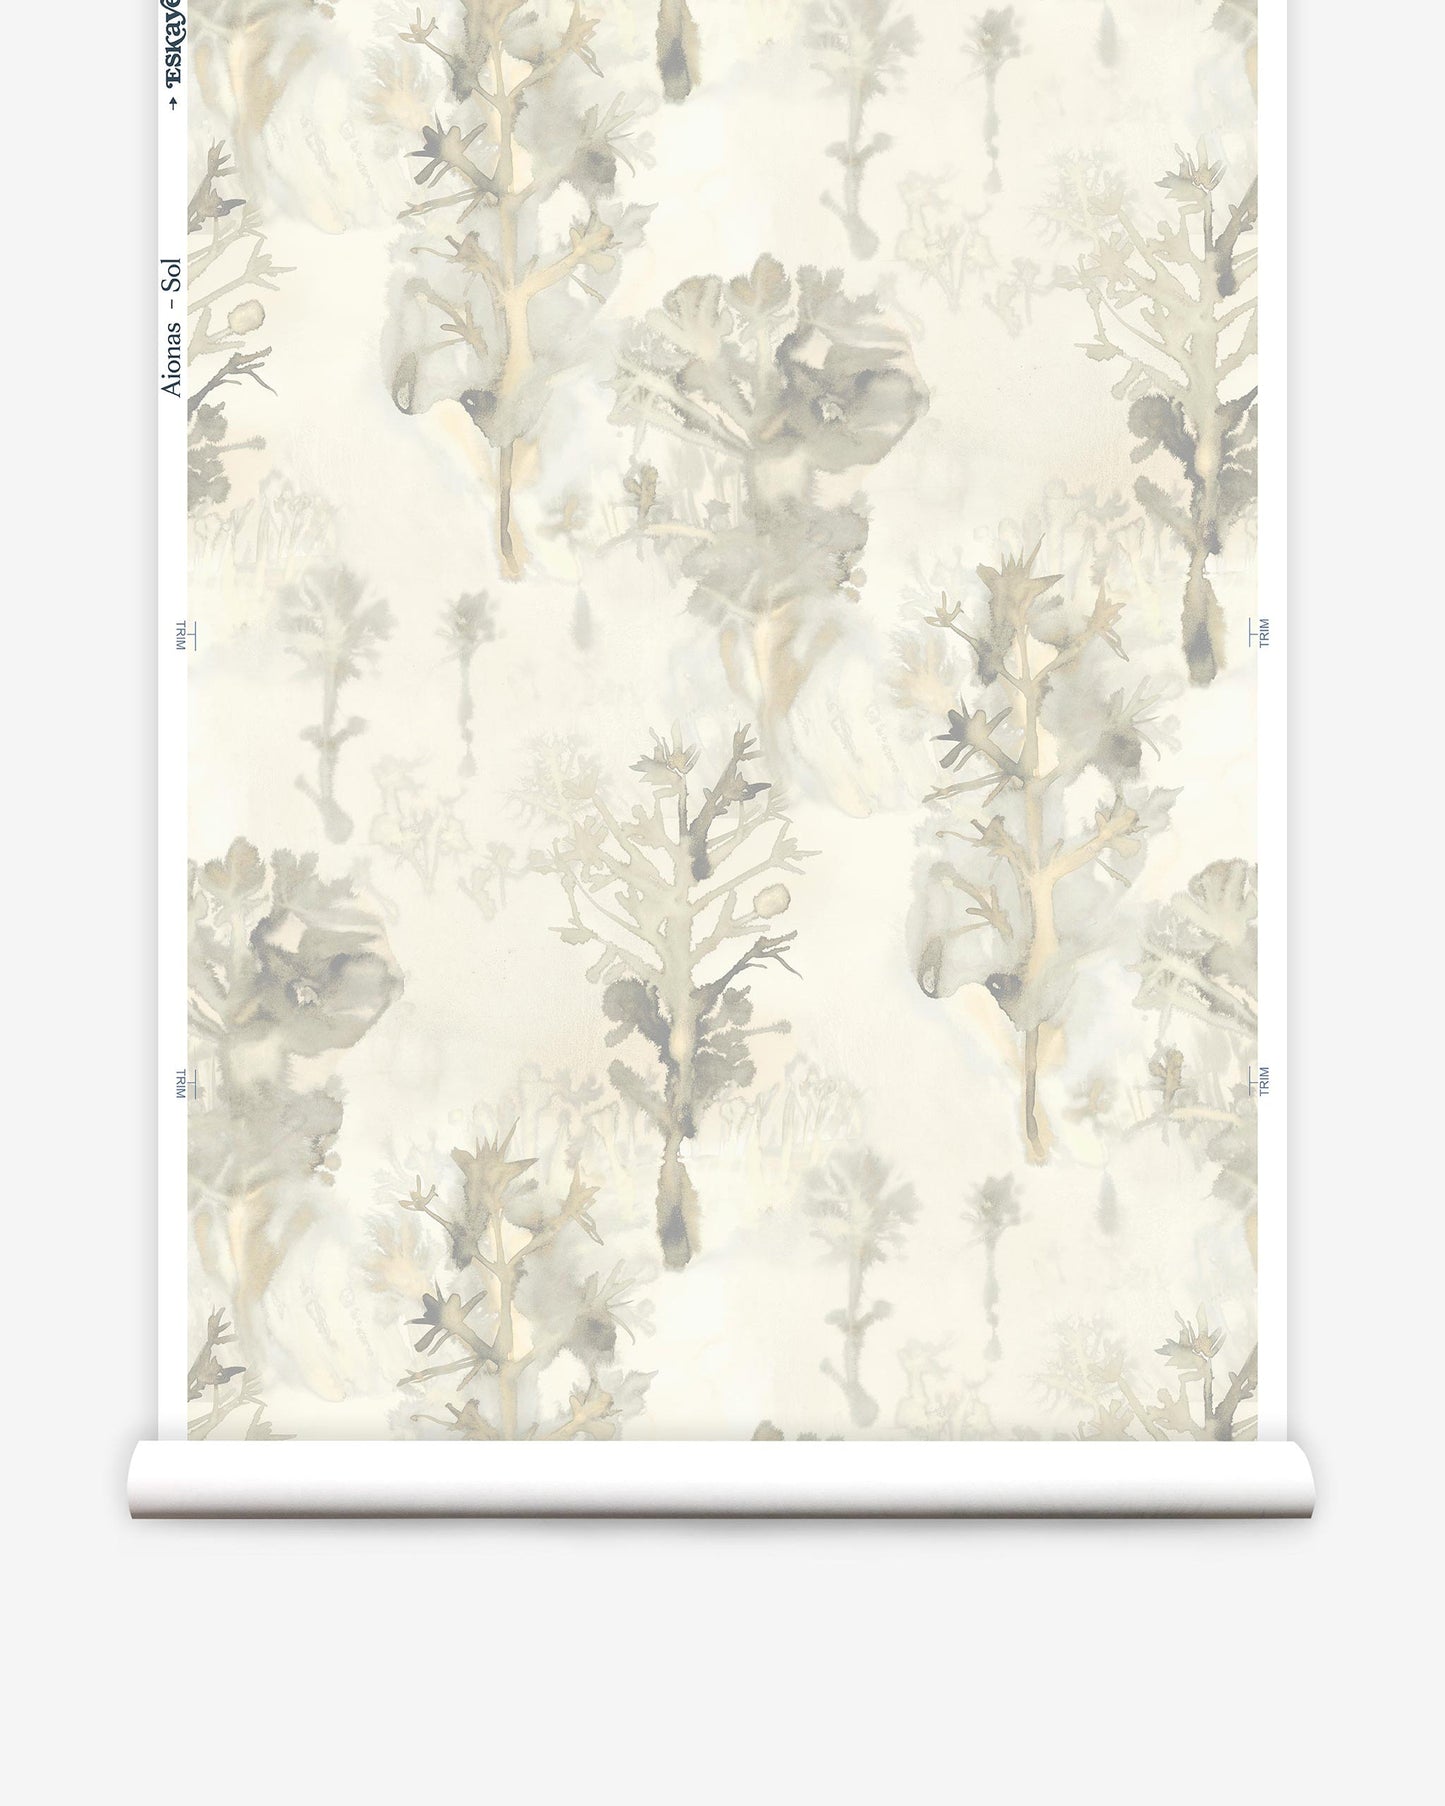 A roll of Aionas Wallpaper||Sol with a beige and grey floral pattern.